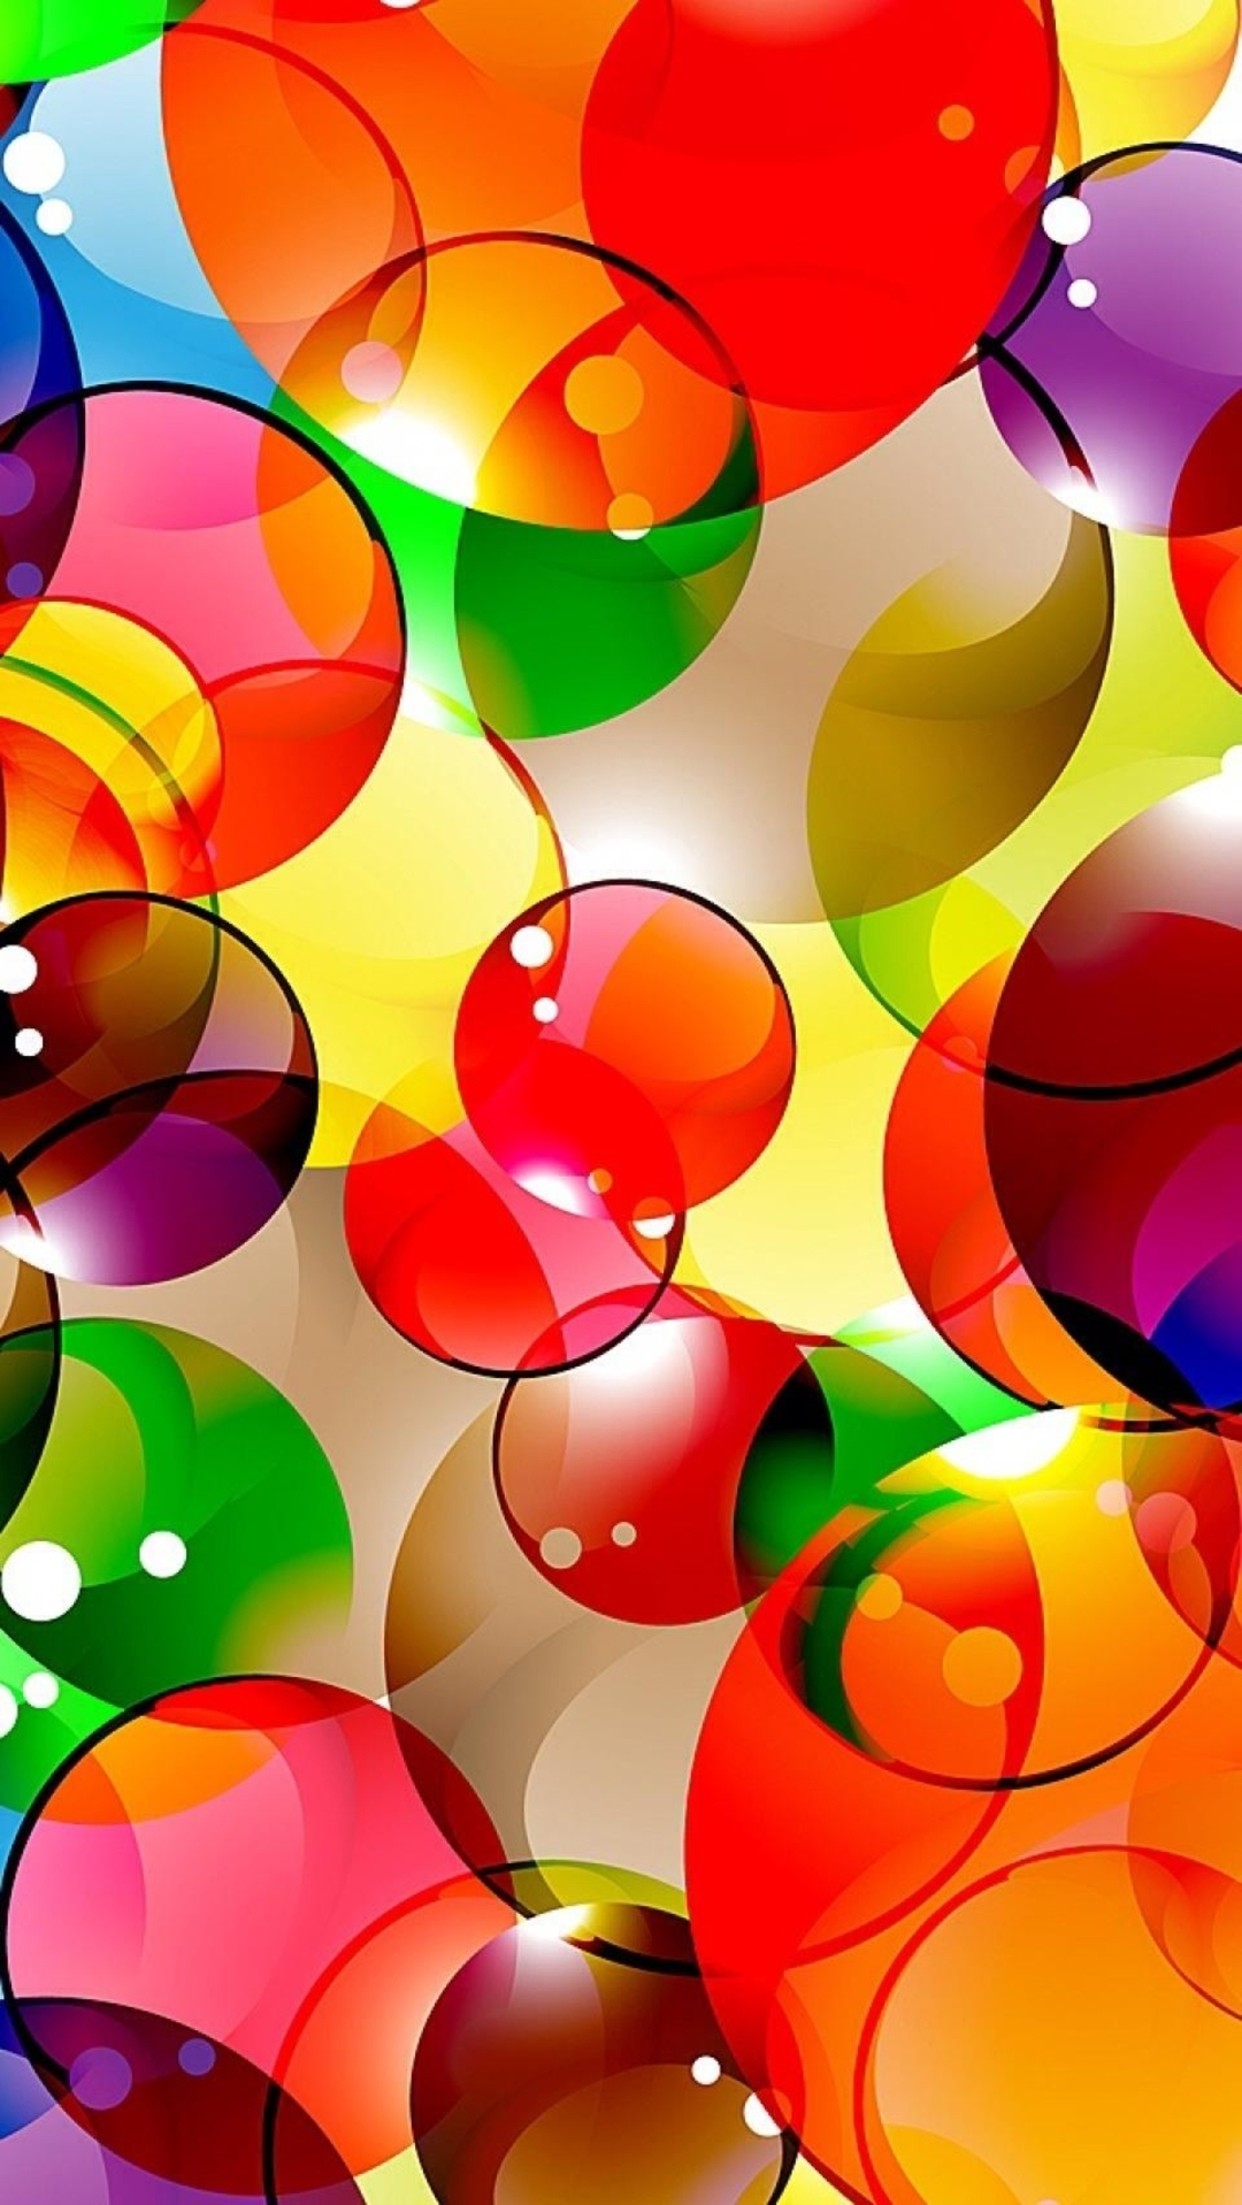 The 1 - Colorful Background Hd - 1242x2205 Wallpaper 